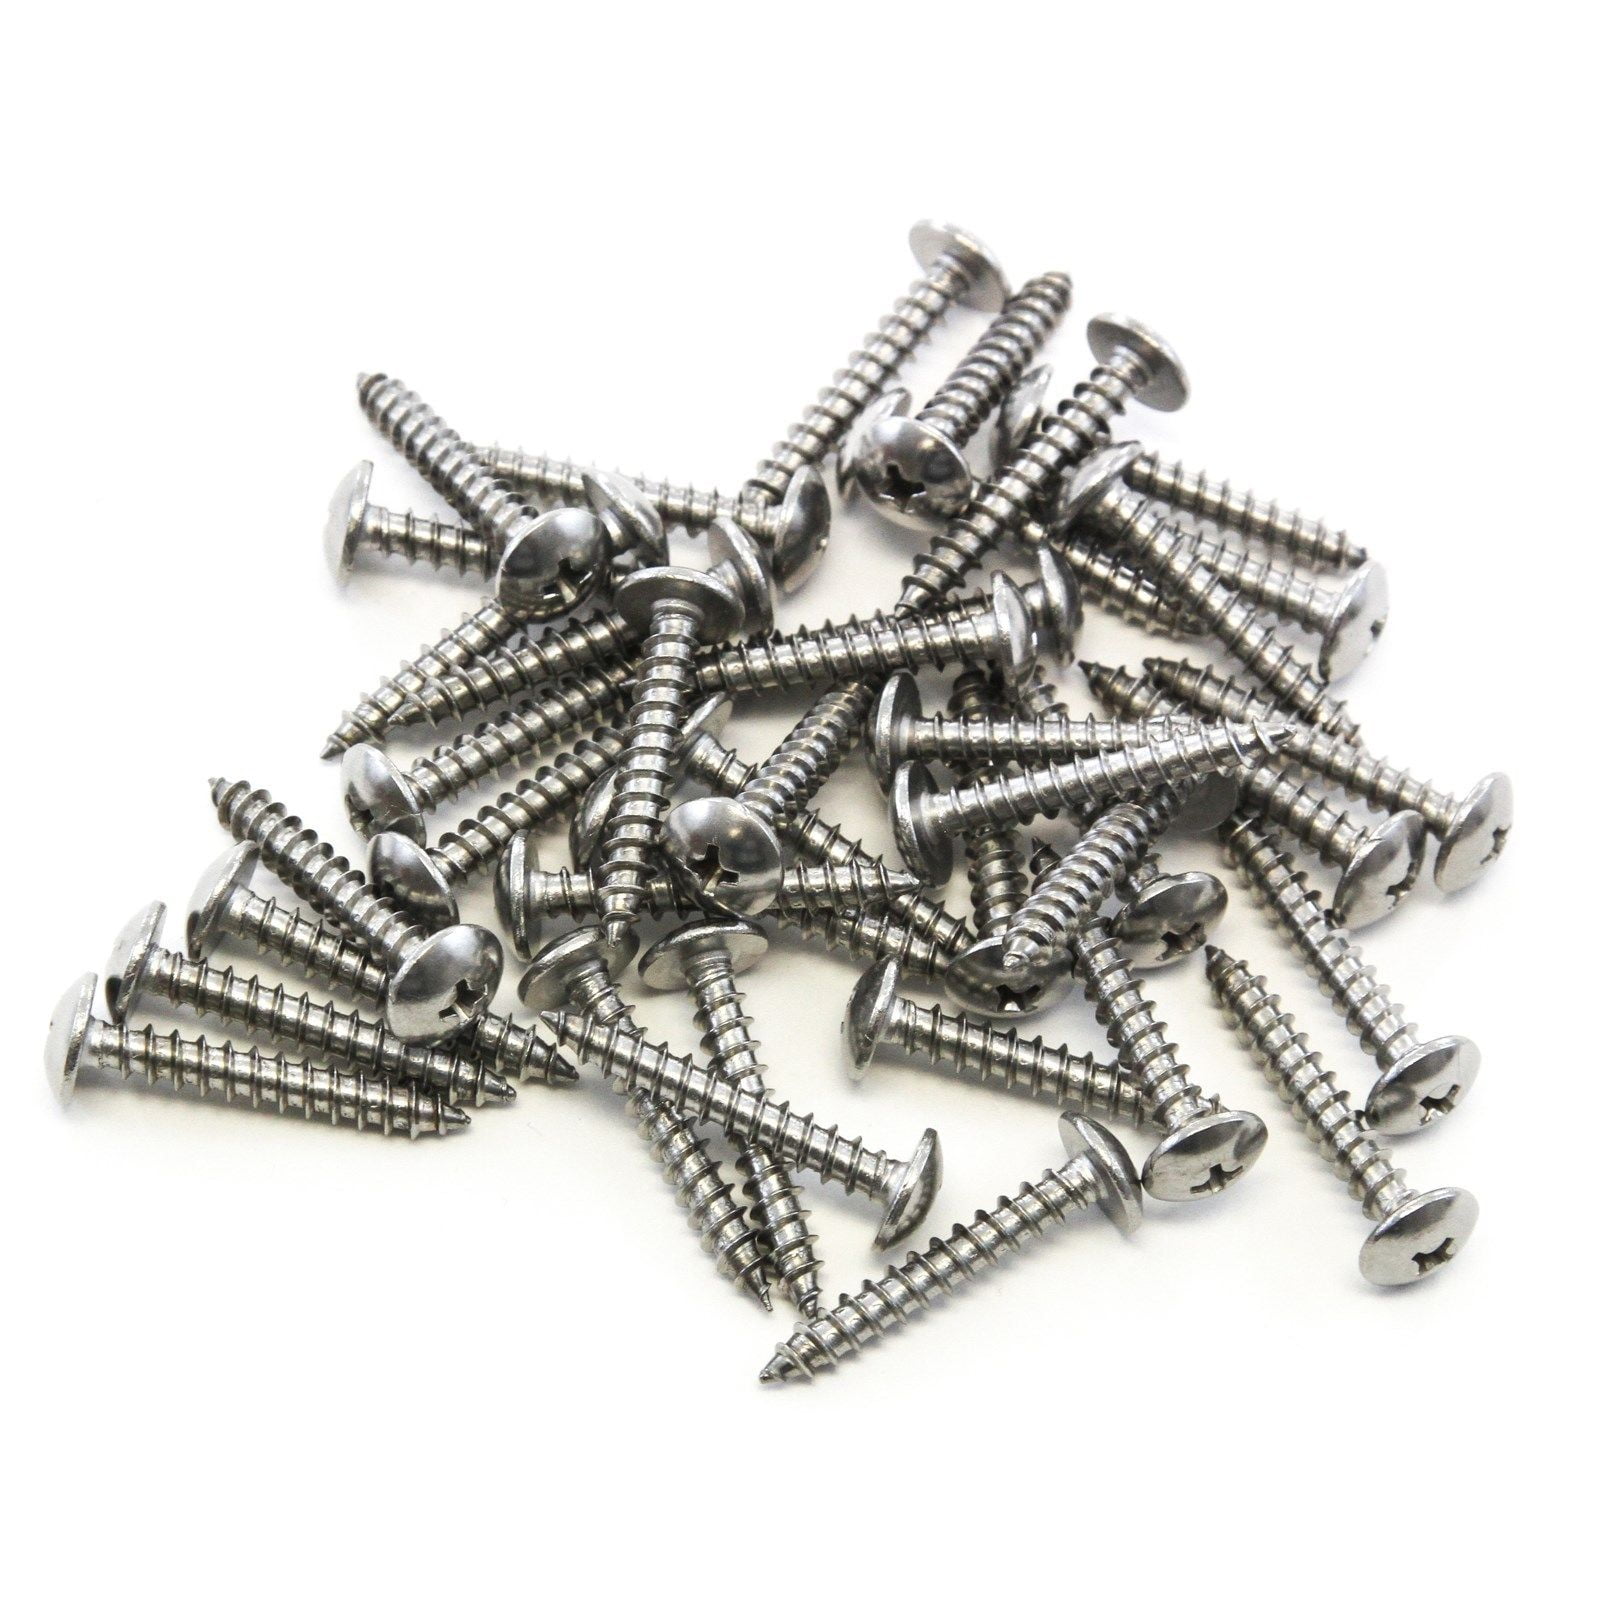 20 Pan Head Self Tapping Screw Set 304 SS Stainless Steel #10 x .75" 